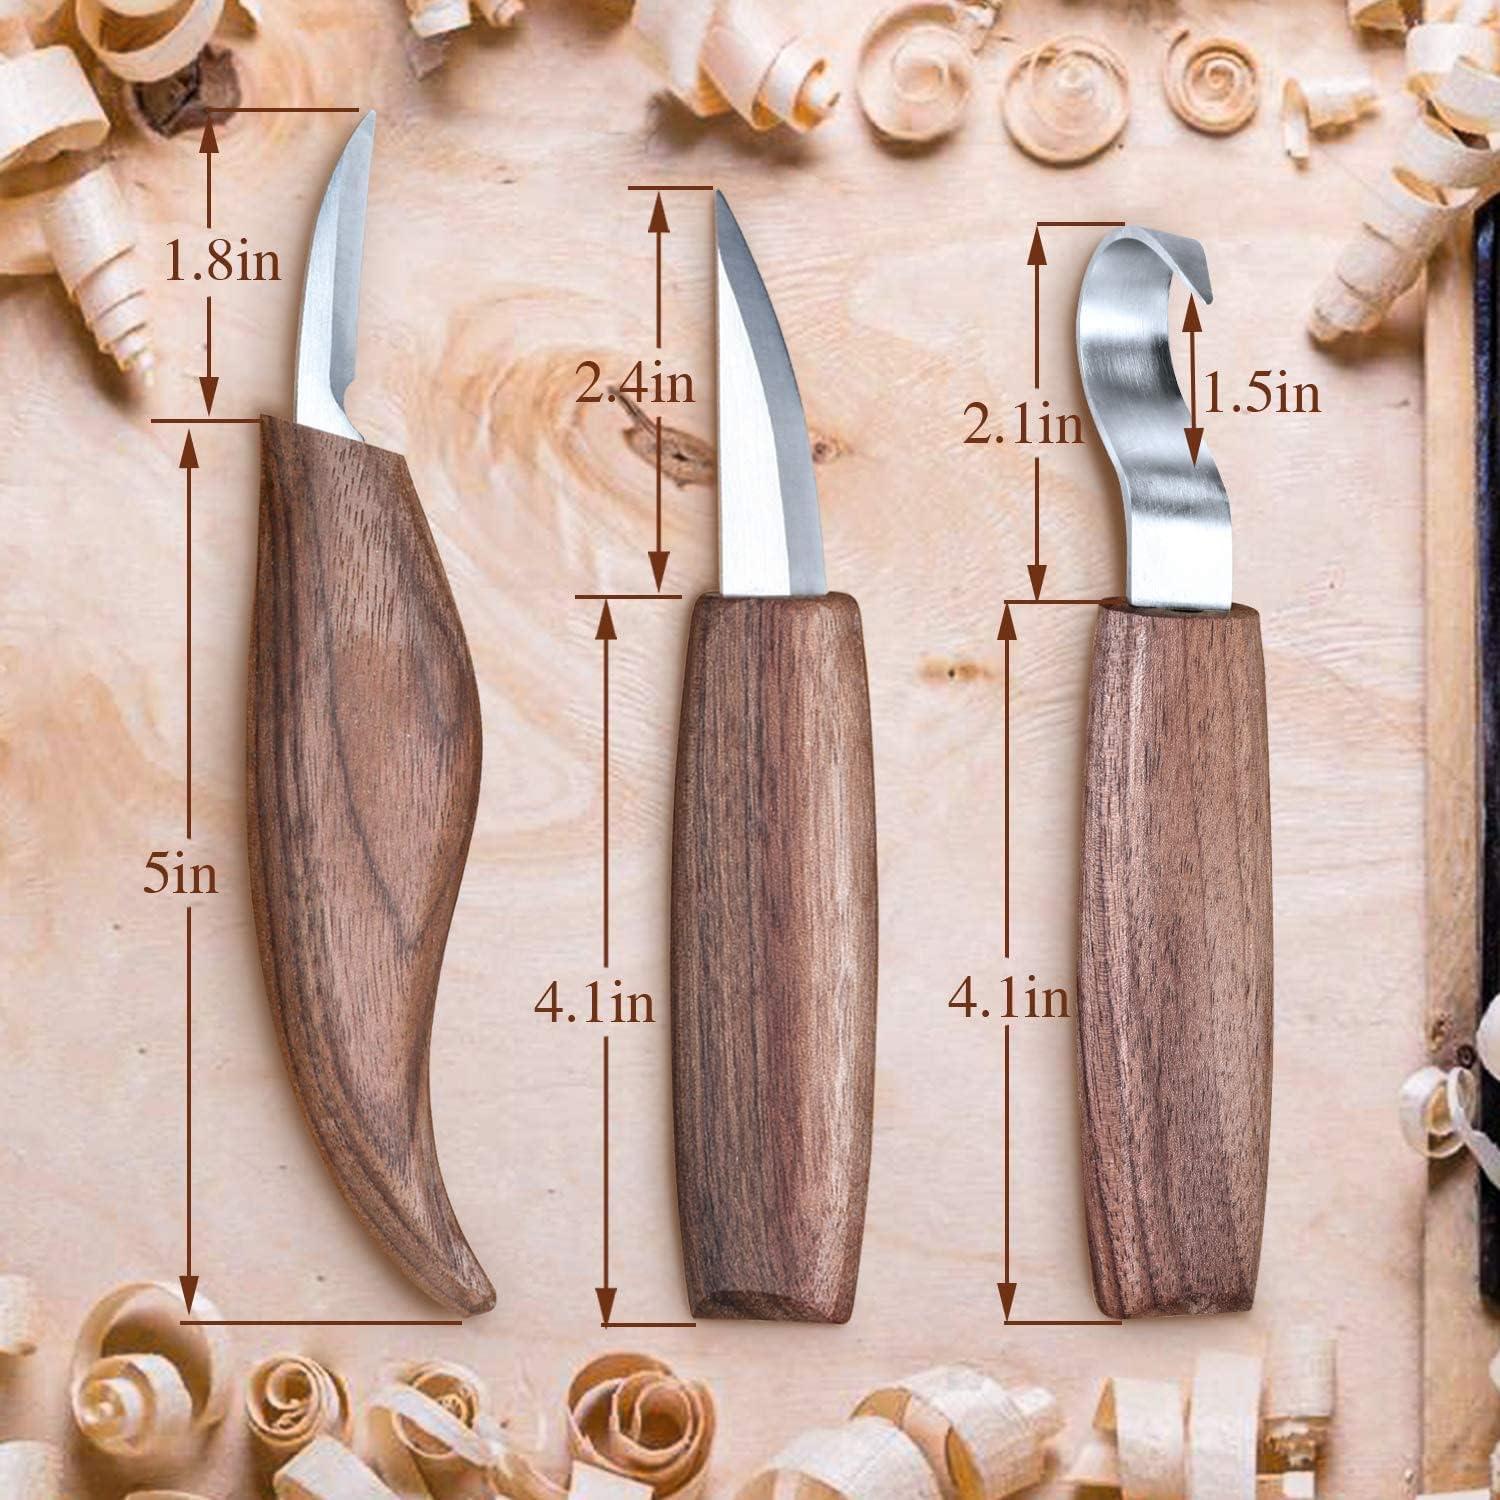 Wood Carving Tools Set+Cut Resistant Gloves,Spoon Carving Hook Knife, Wood  Carving Whittling Knife, Chip Carving Detail Knife, Leather Strop and  Polishing Compound (5PCS) - Yahoo Shopping